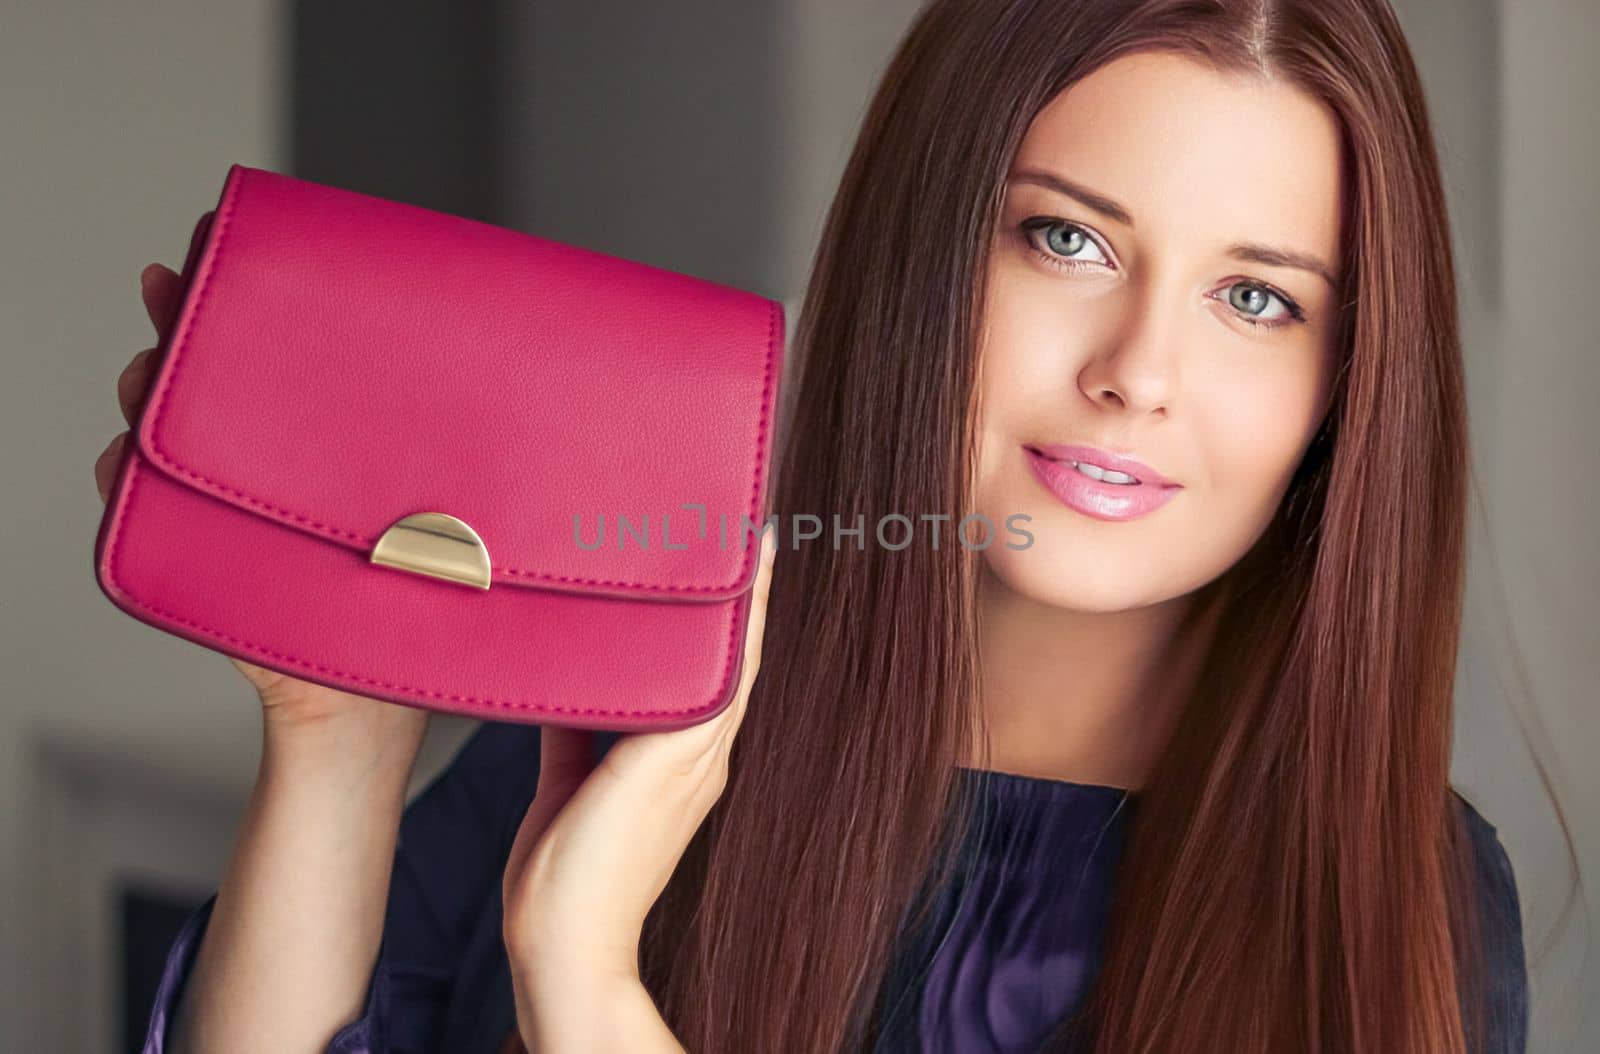 Fashion and accessories, happy beautiful woman holding small pink handbag with golden details as stylish accessory and luxury shopping concept